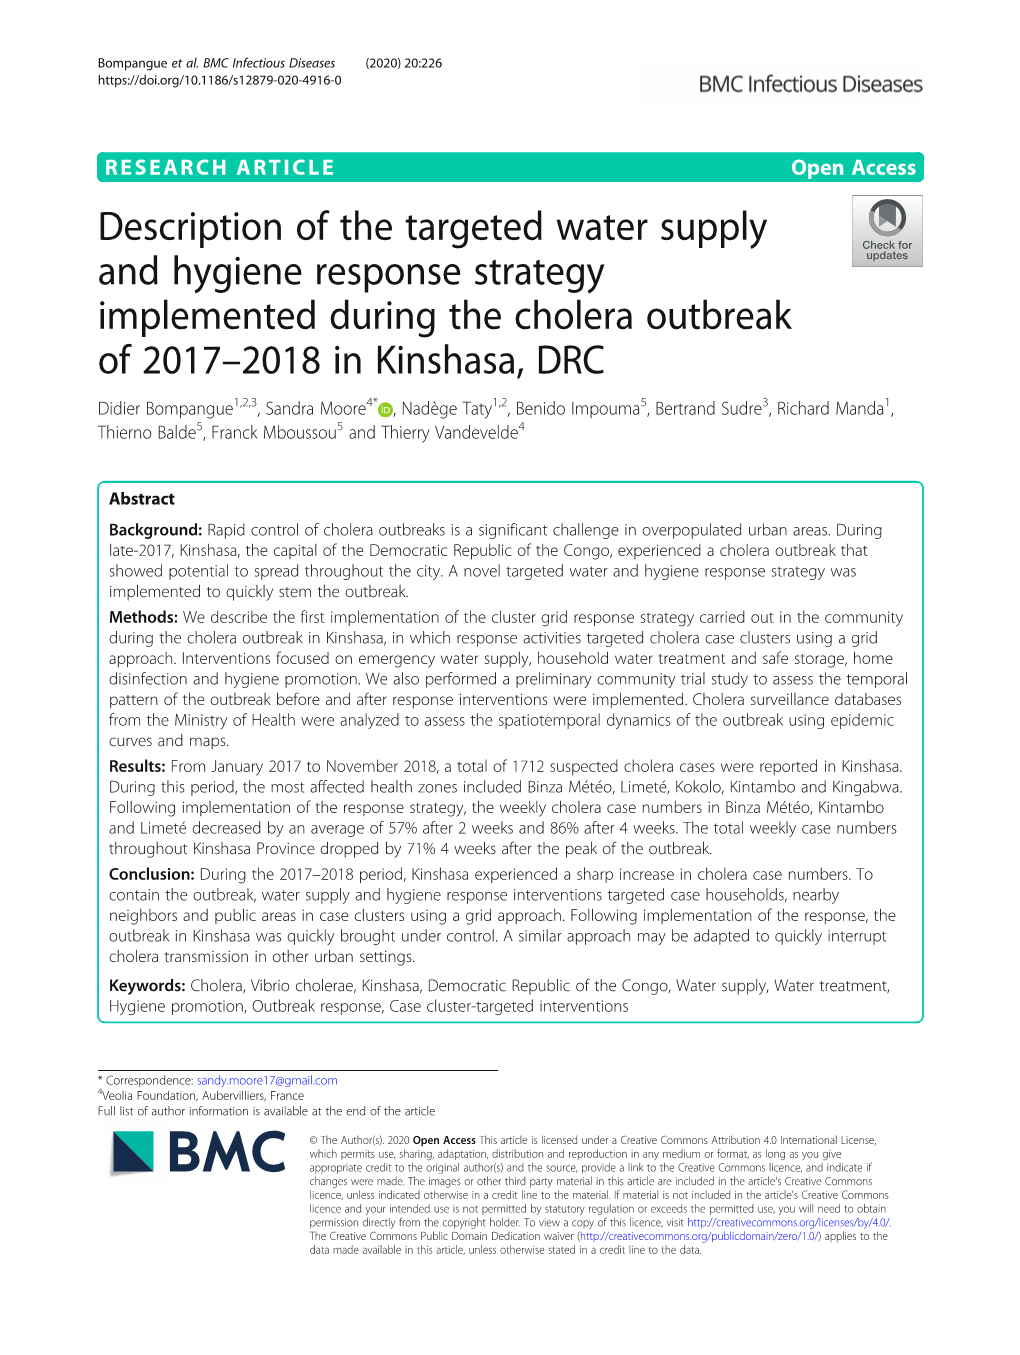 Description of the Targeted Water Supply and Hygiene Response